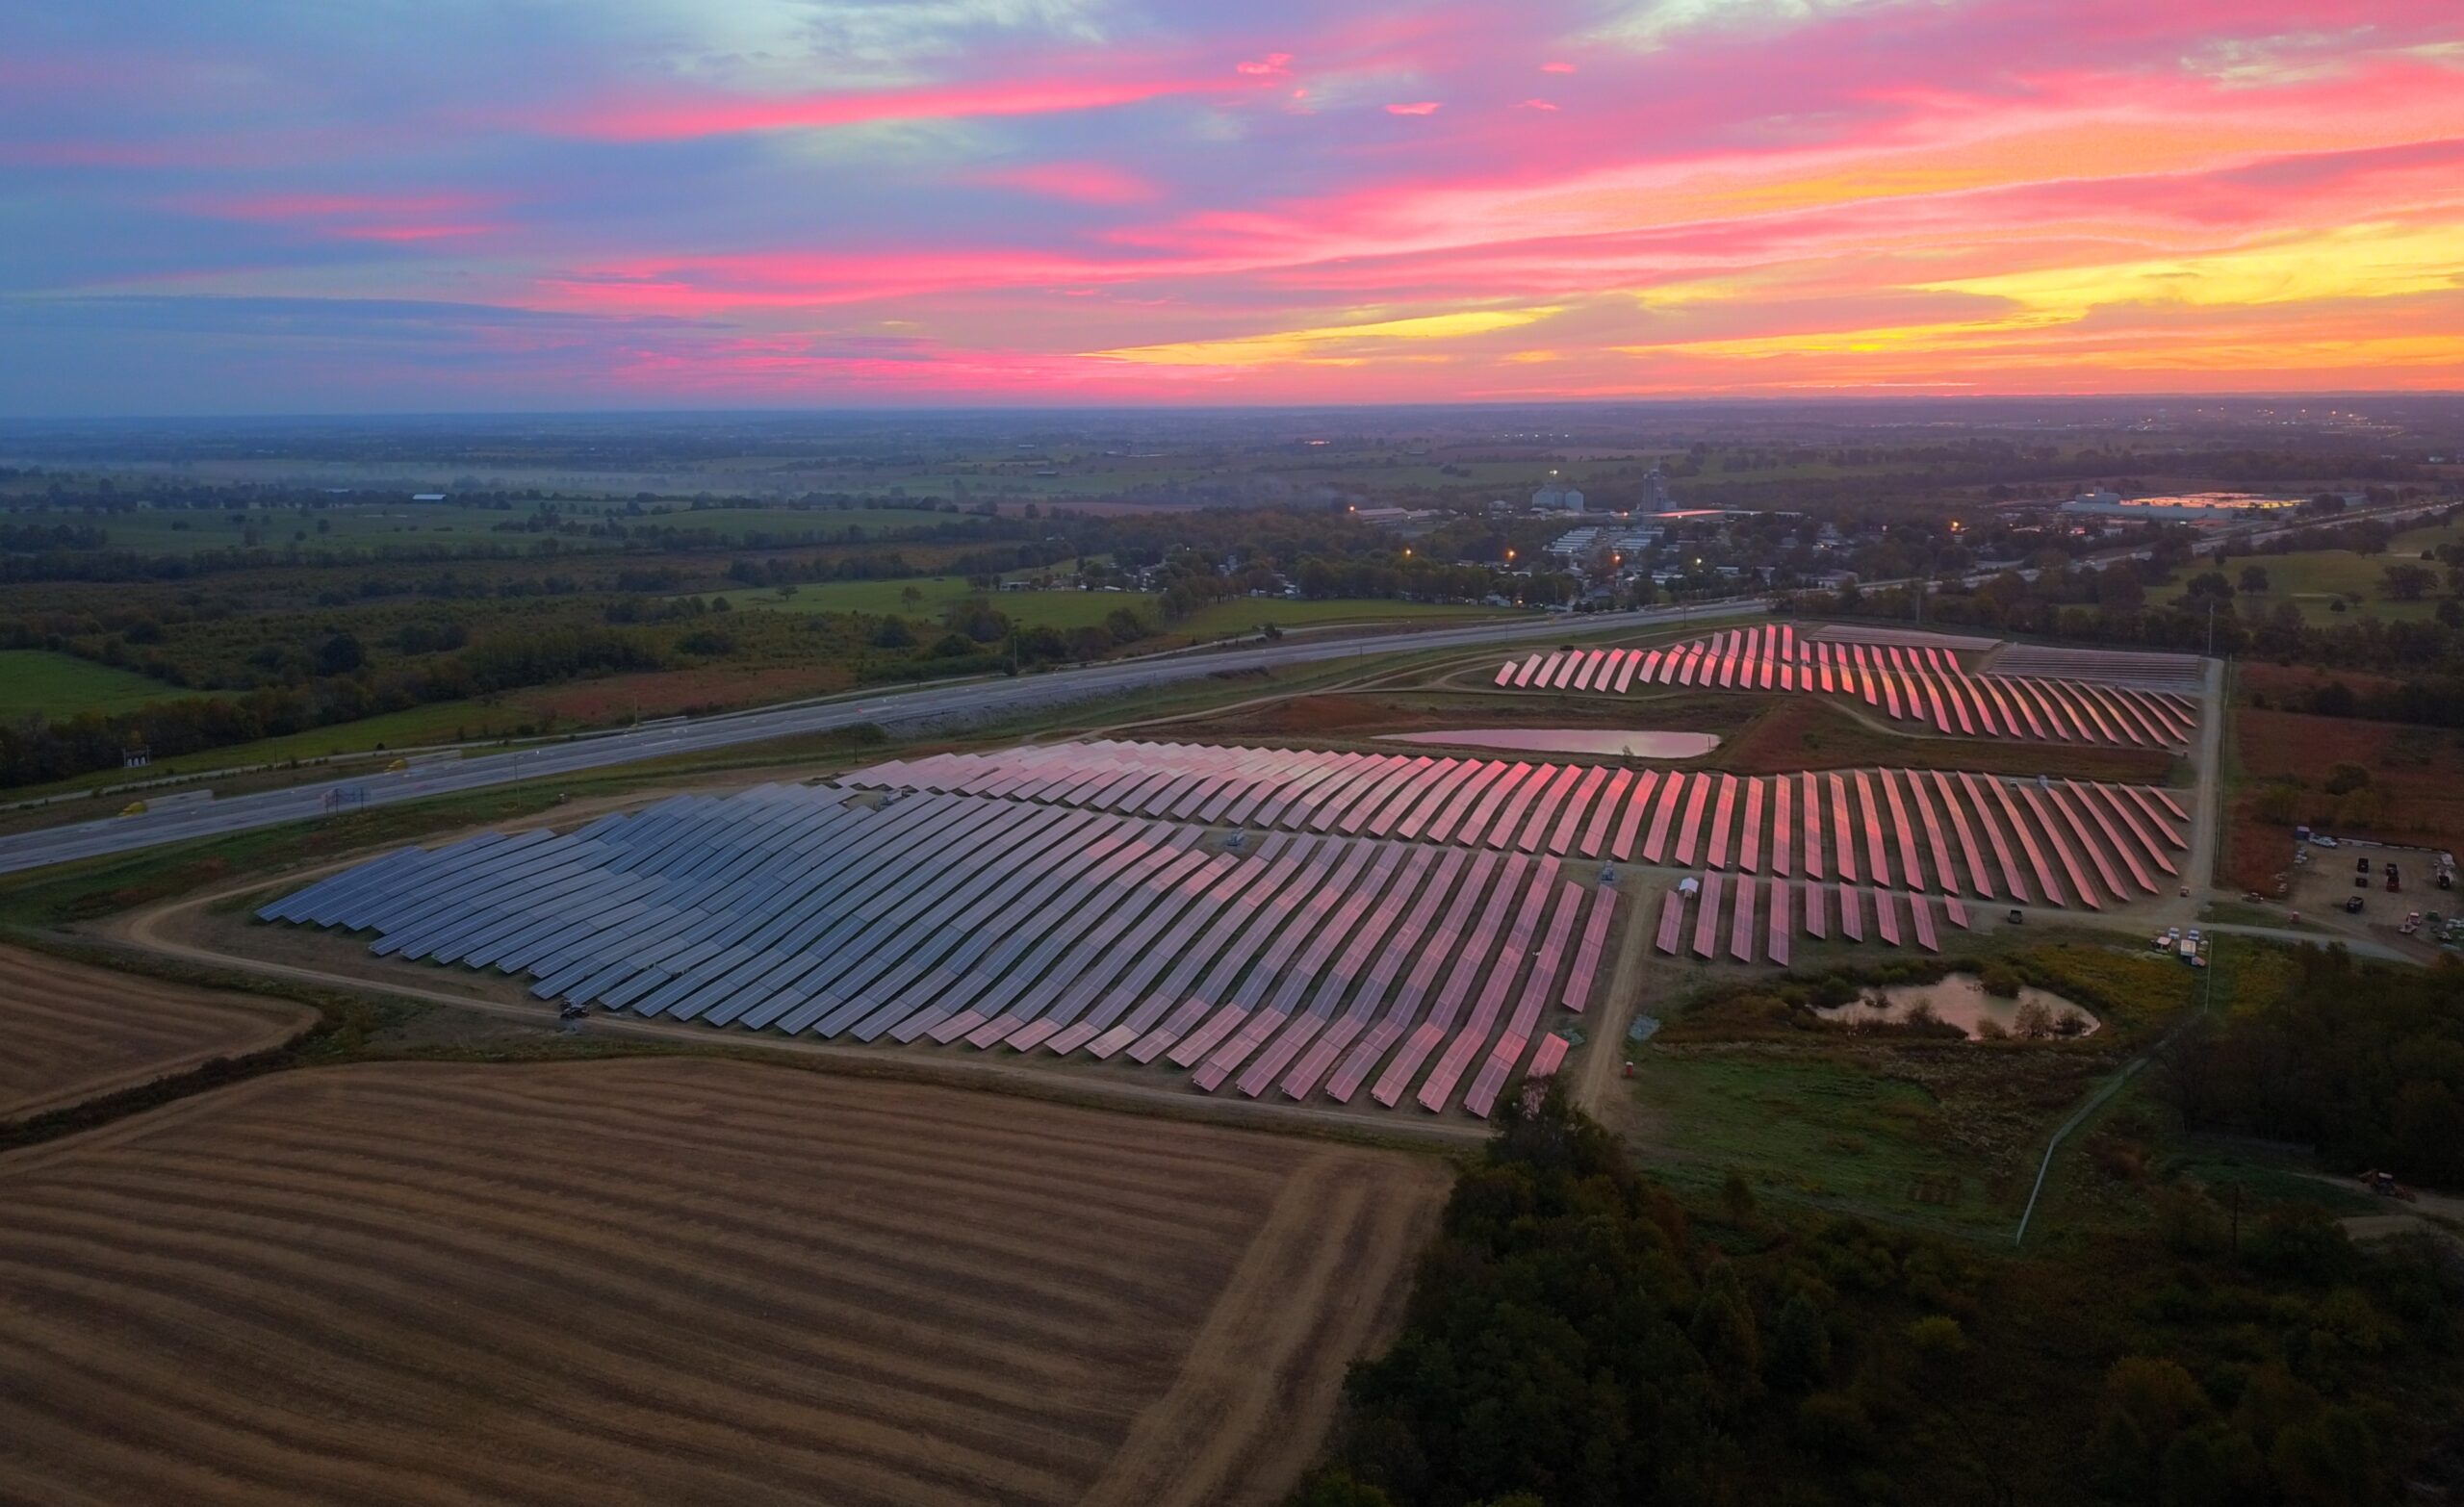 An expansive solar farm seen from above, featuring neatly arranged solar panels capturing the last rays of sunlight during sunset.